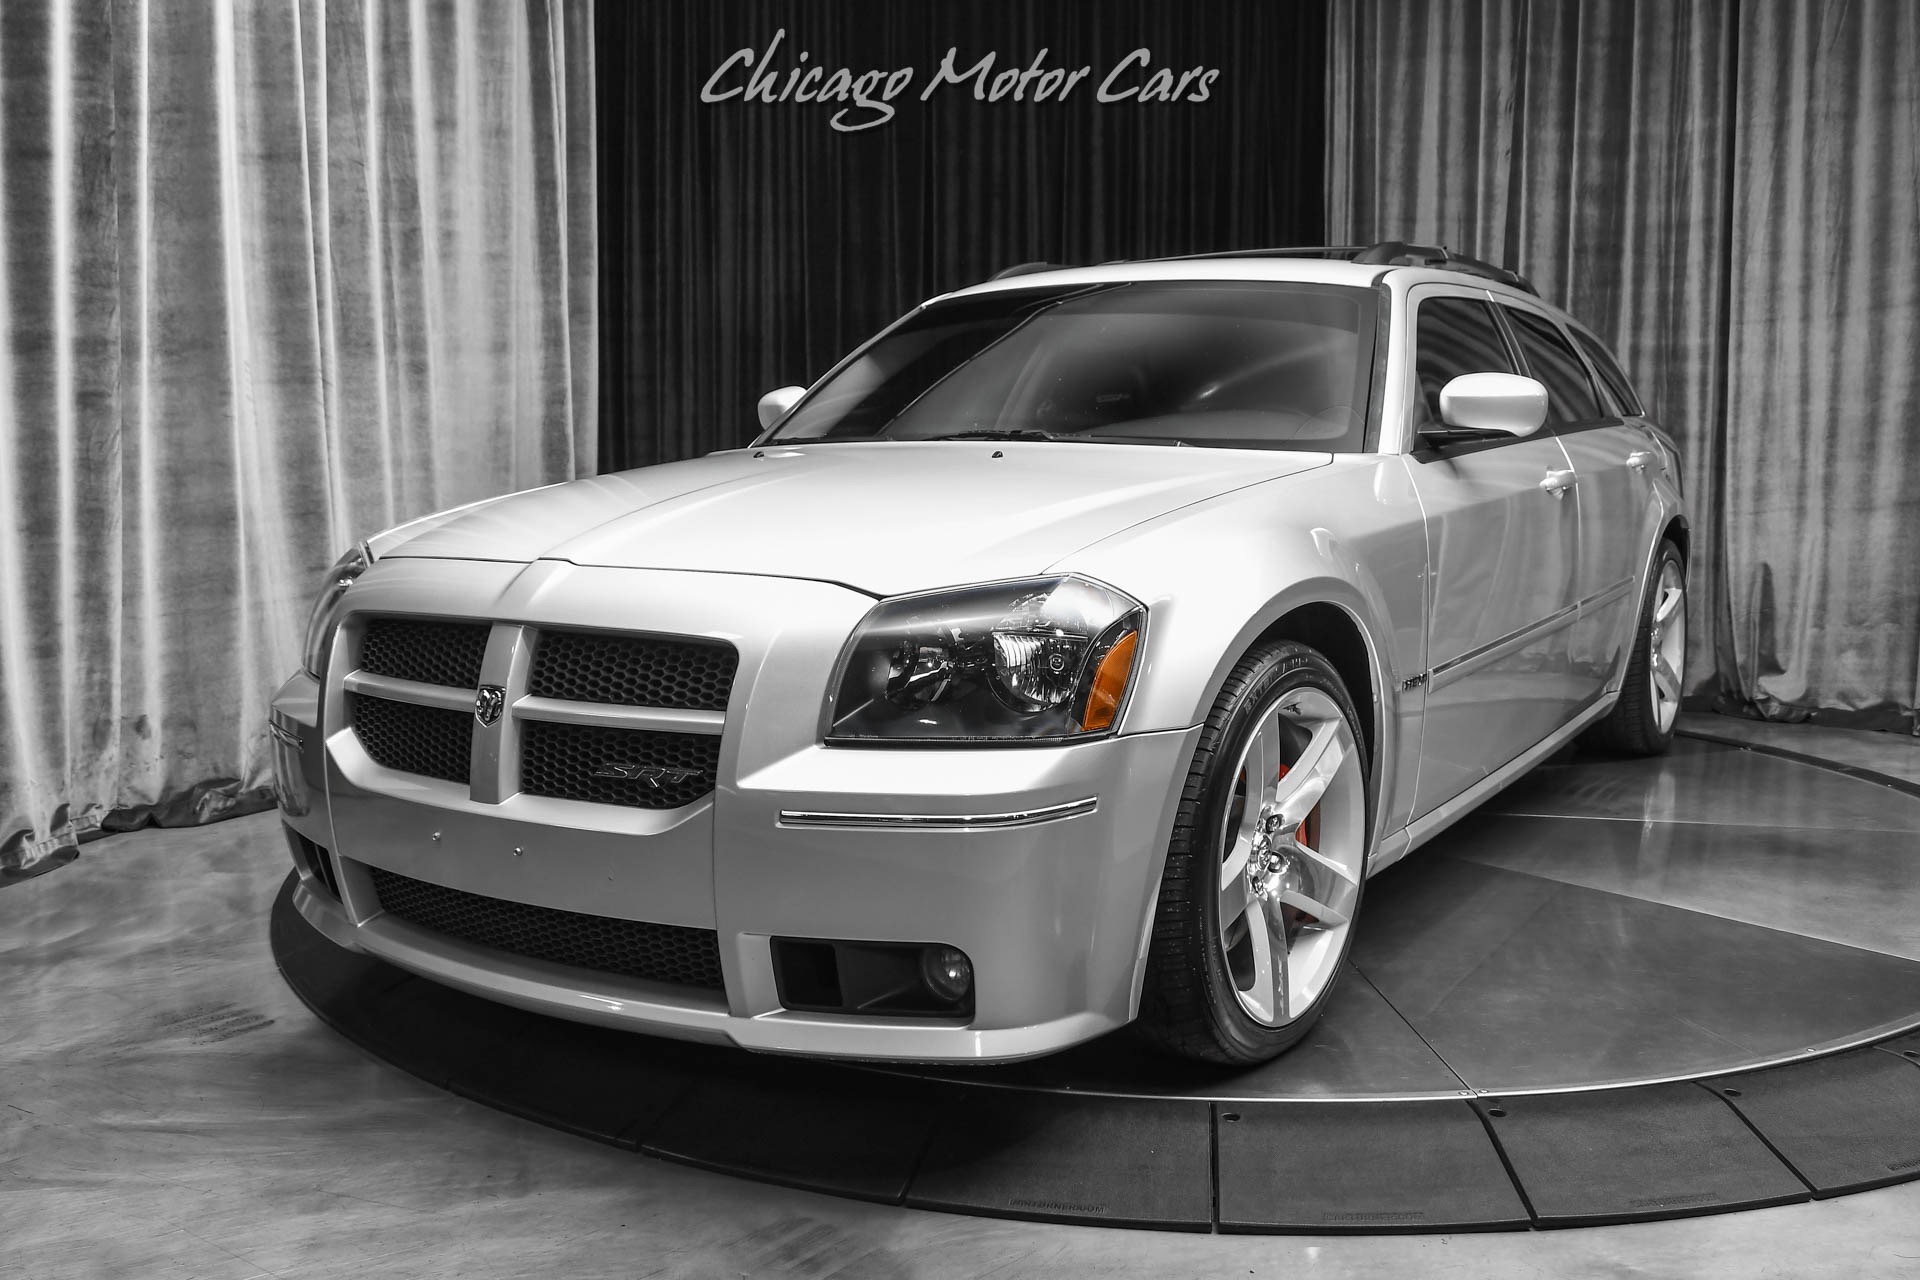 Used-2007-Dodge-Magnum-SRT-8-Wagon-Collectible-425hp-Factory-Brembos-Sunroof-Service-History